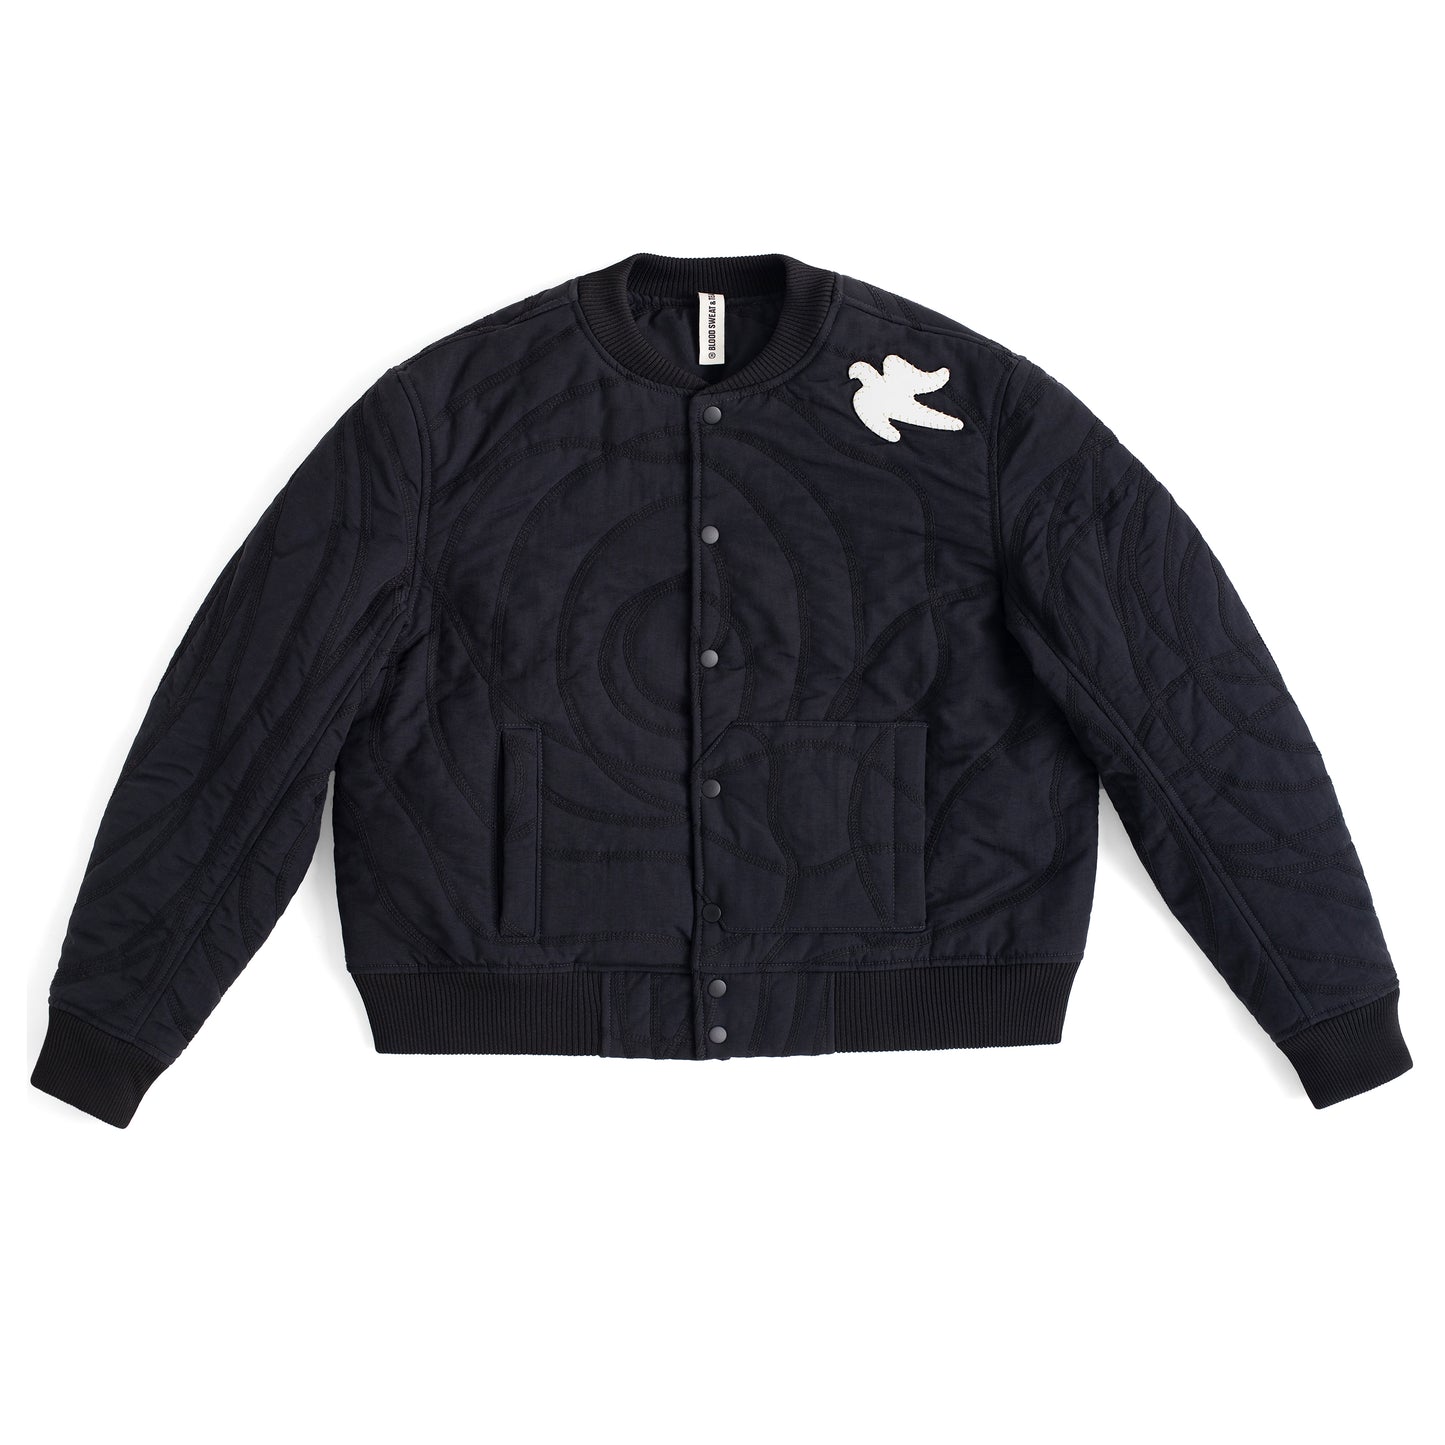 A STUDY: "LINES"" Quilted Varsity Jacket